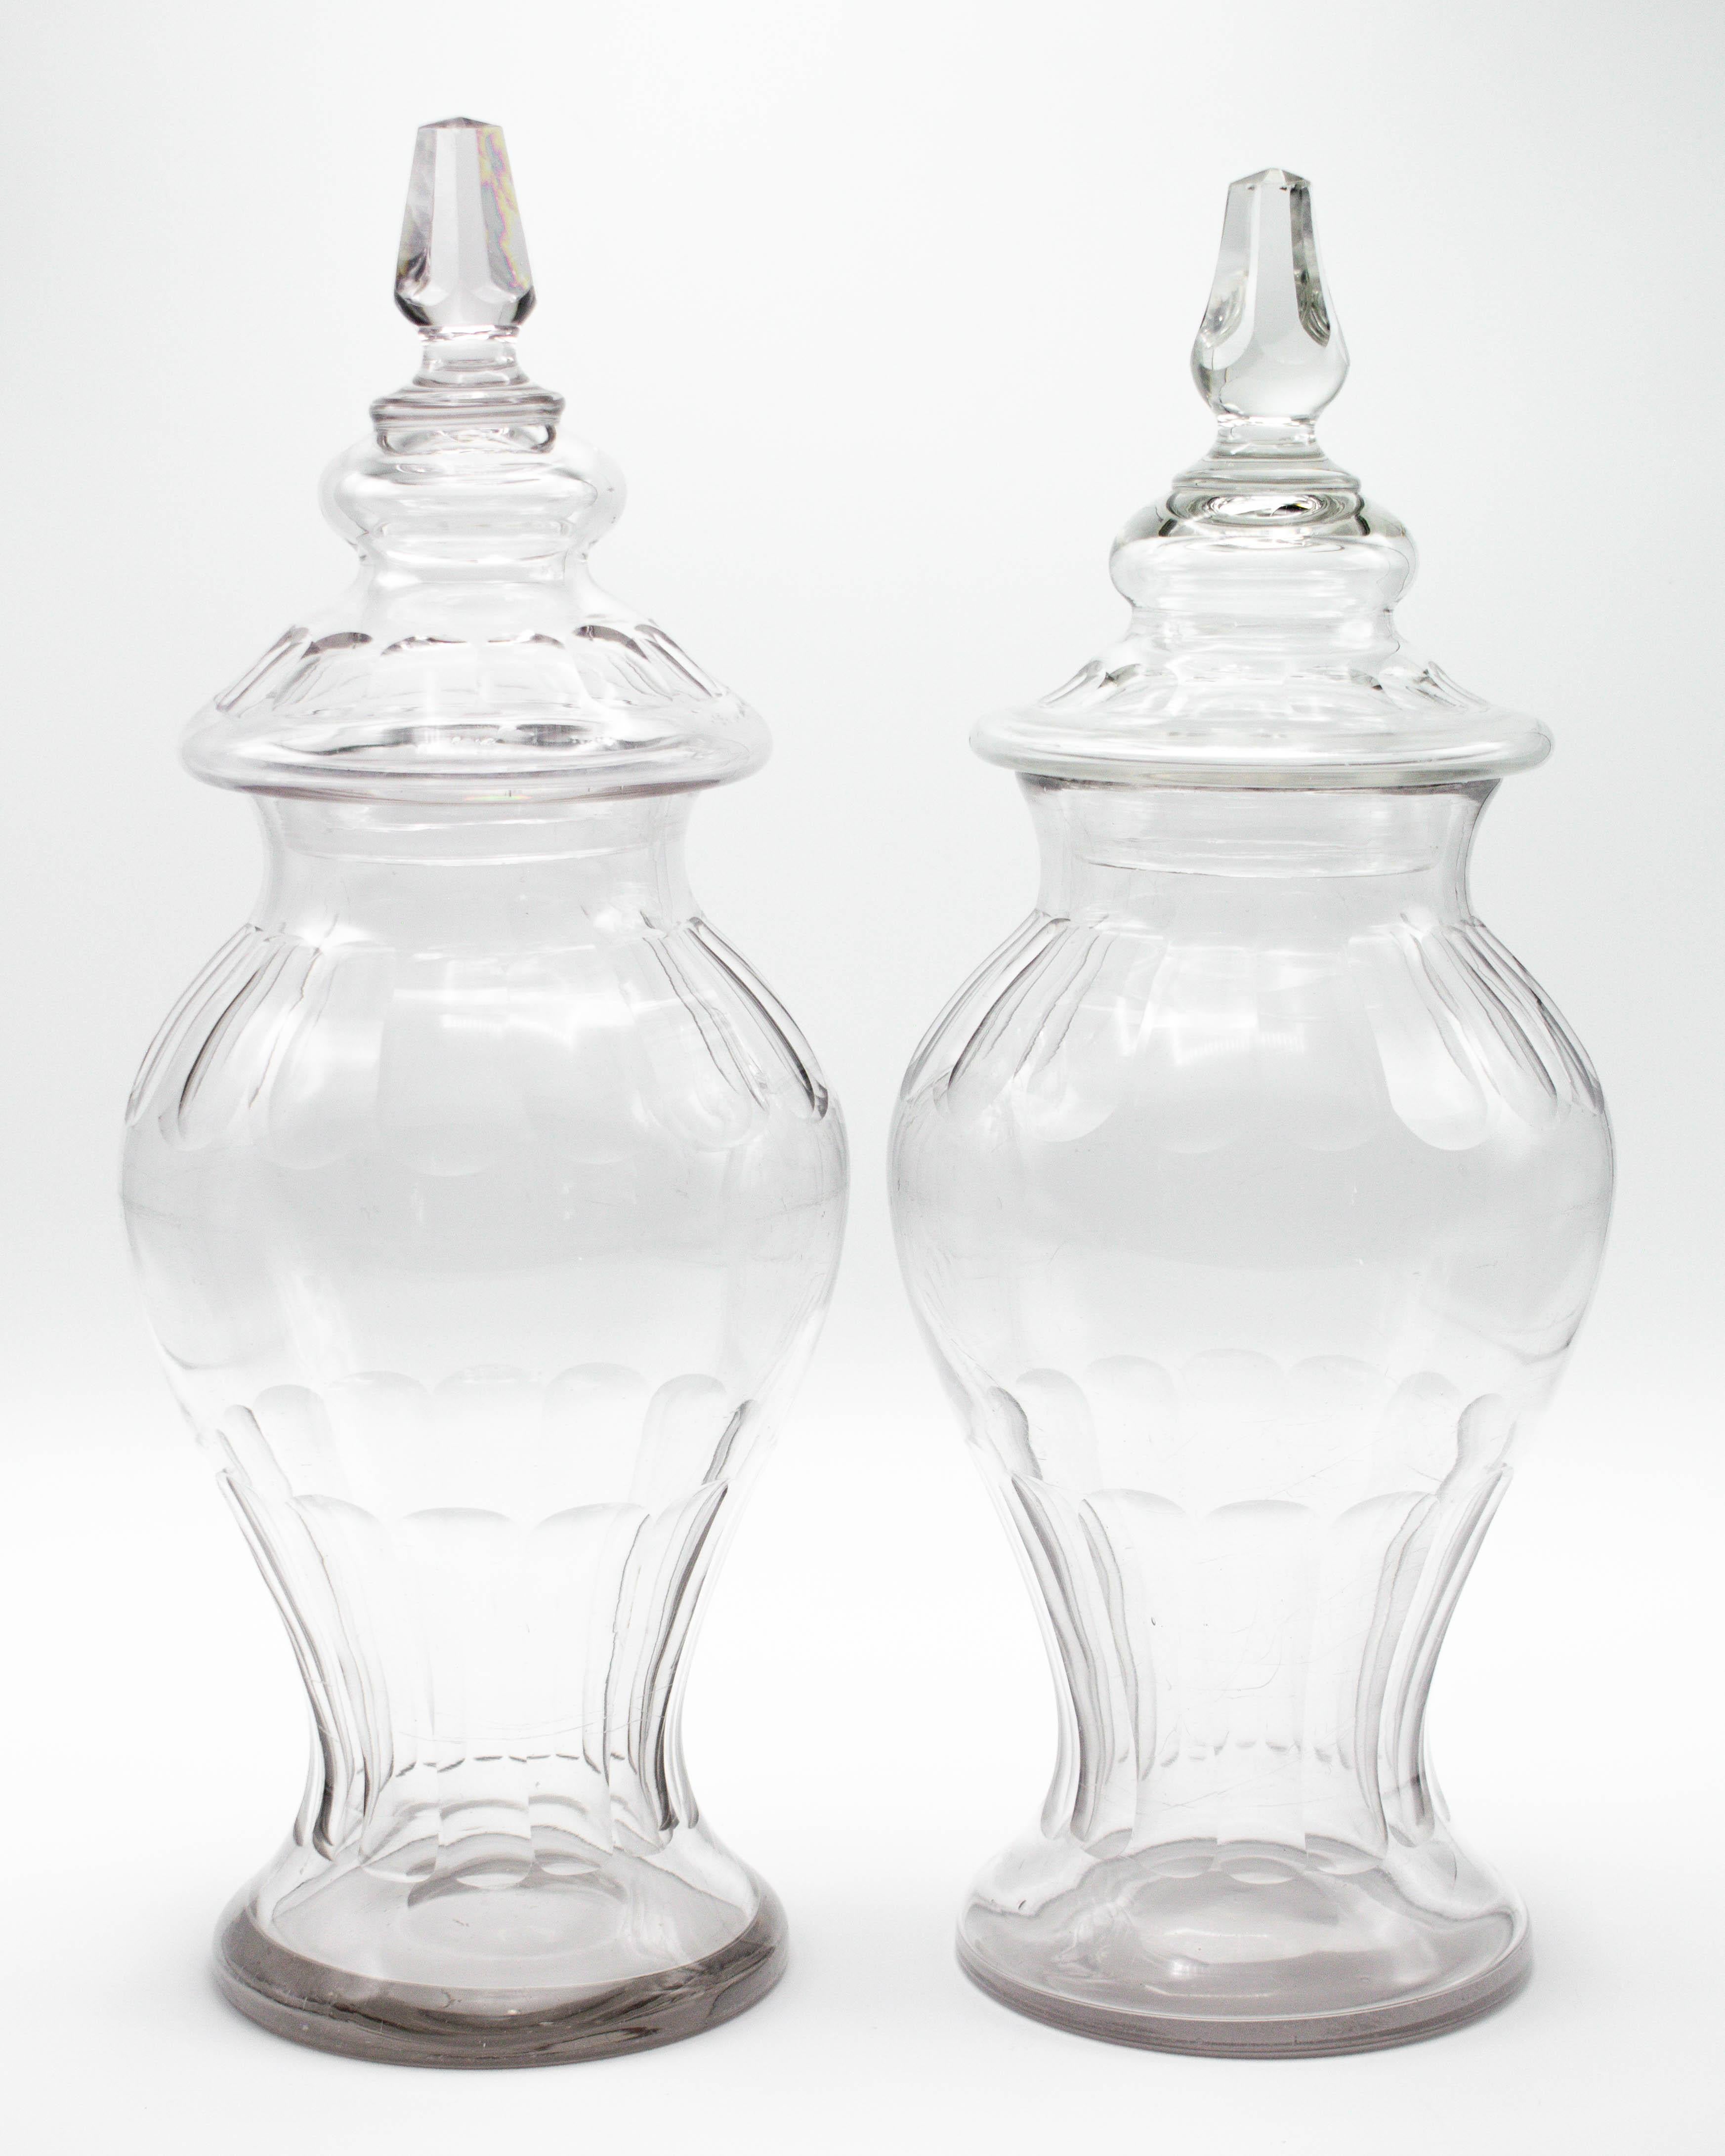 A pair of French glass lidded apothecary or candy jars. Urn shaped faceted form. Lids with cut glass knobs. In good condition for the age and use, with light scratches and small chips to knobs. Purchased from a confiserie, or sweet shop, along many